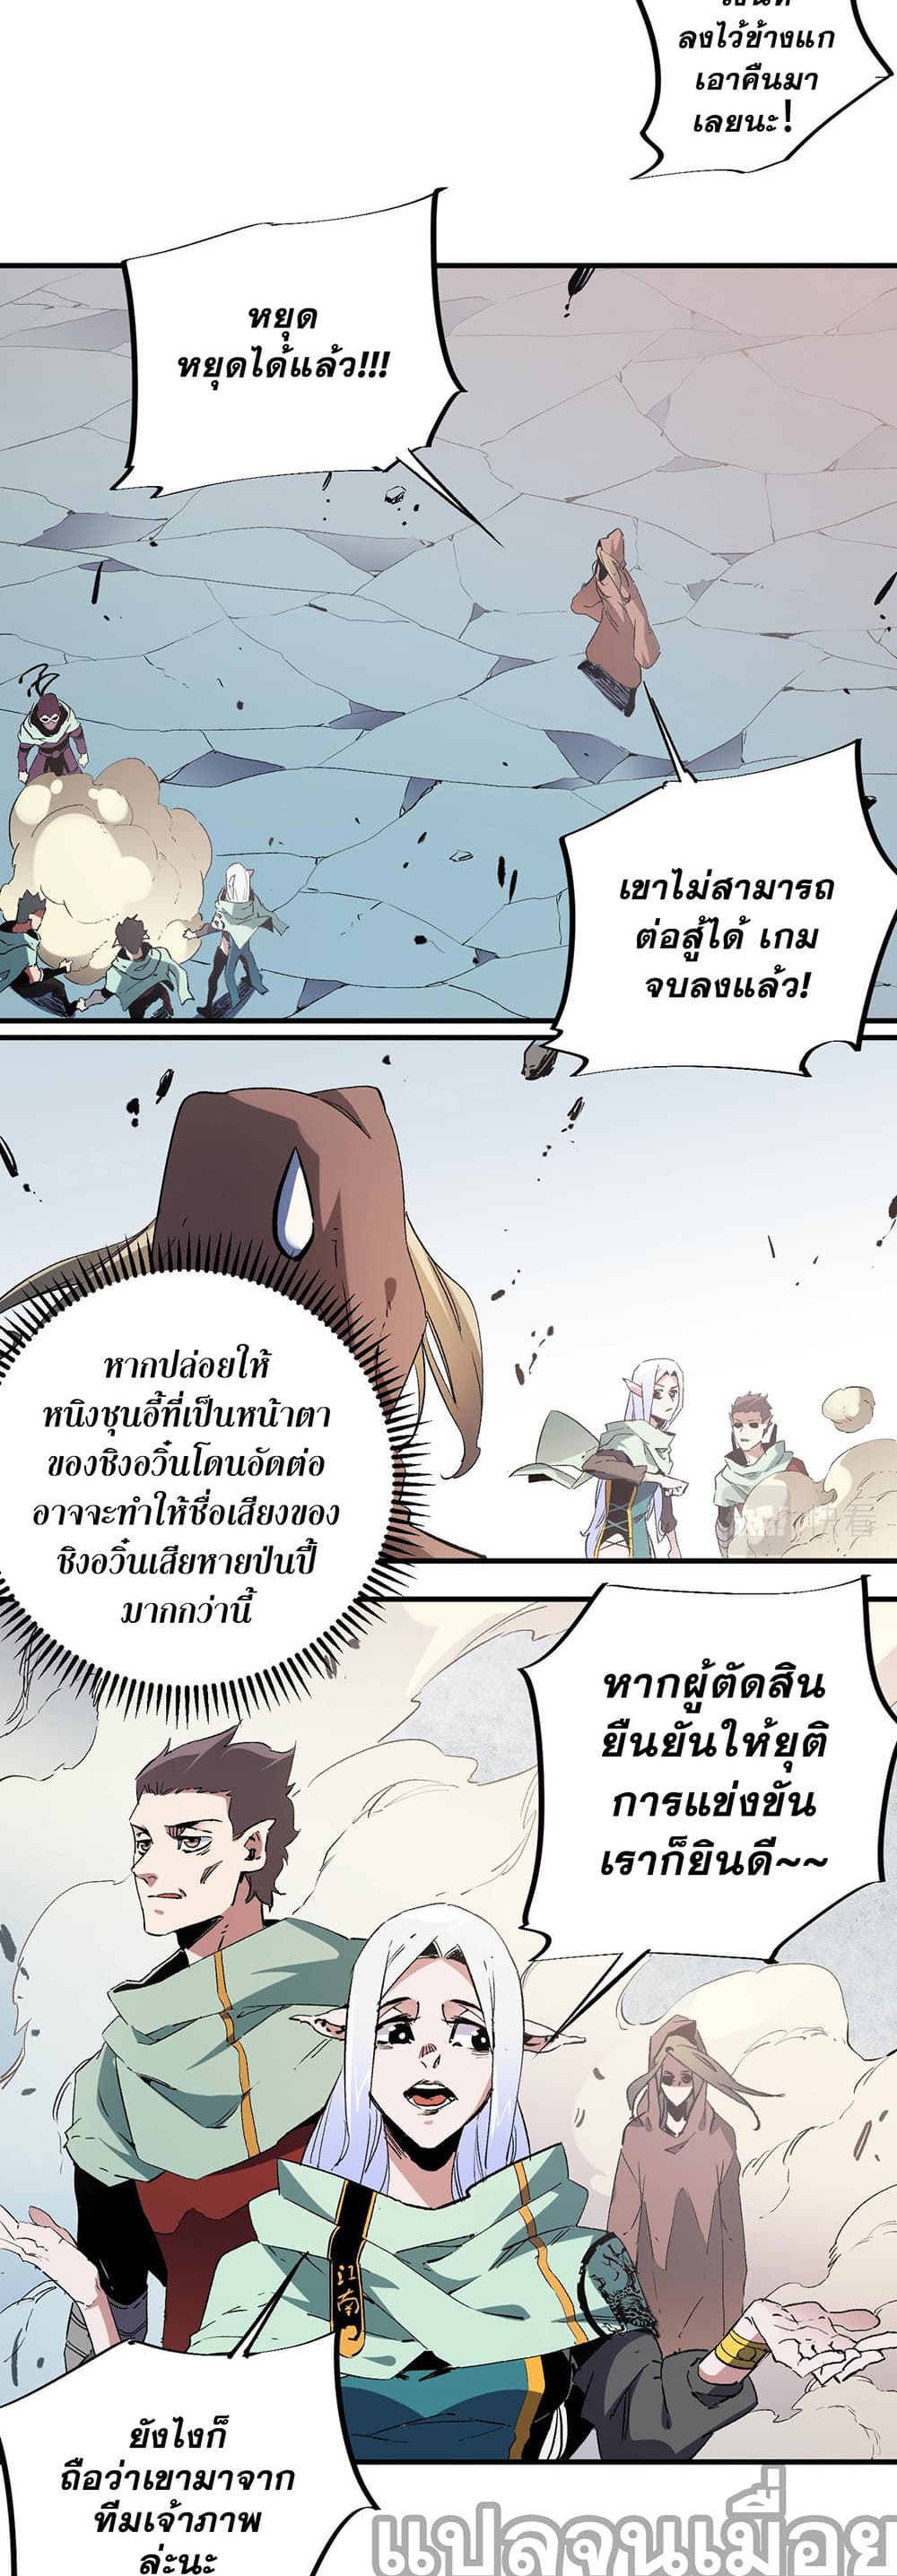 Job Changing for the Entire Population: The Jobless Me Will Terminate the Gods ฉันคือผู้เล่นไร้อาชีพที่สังหารเหล่าเทพ 38-38